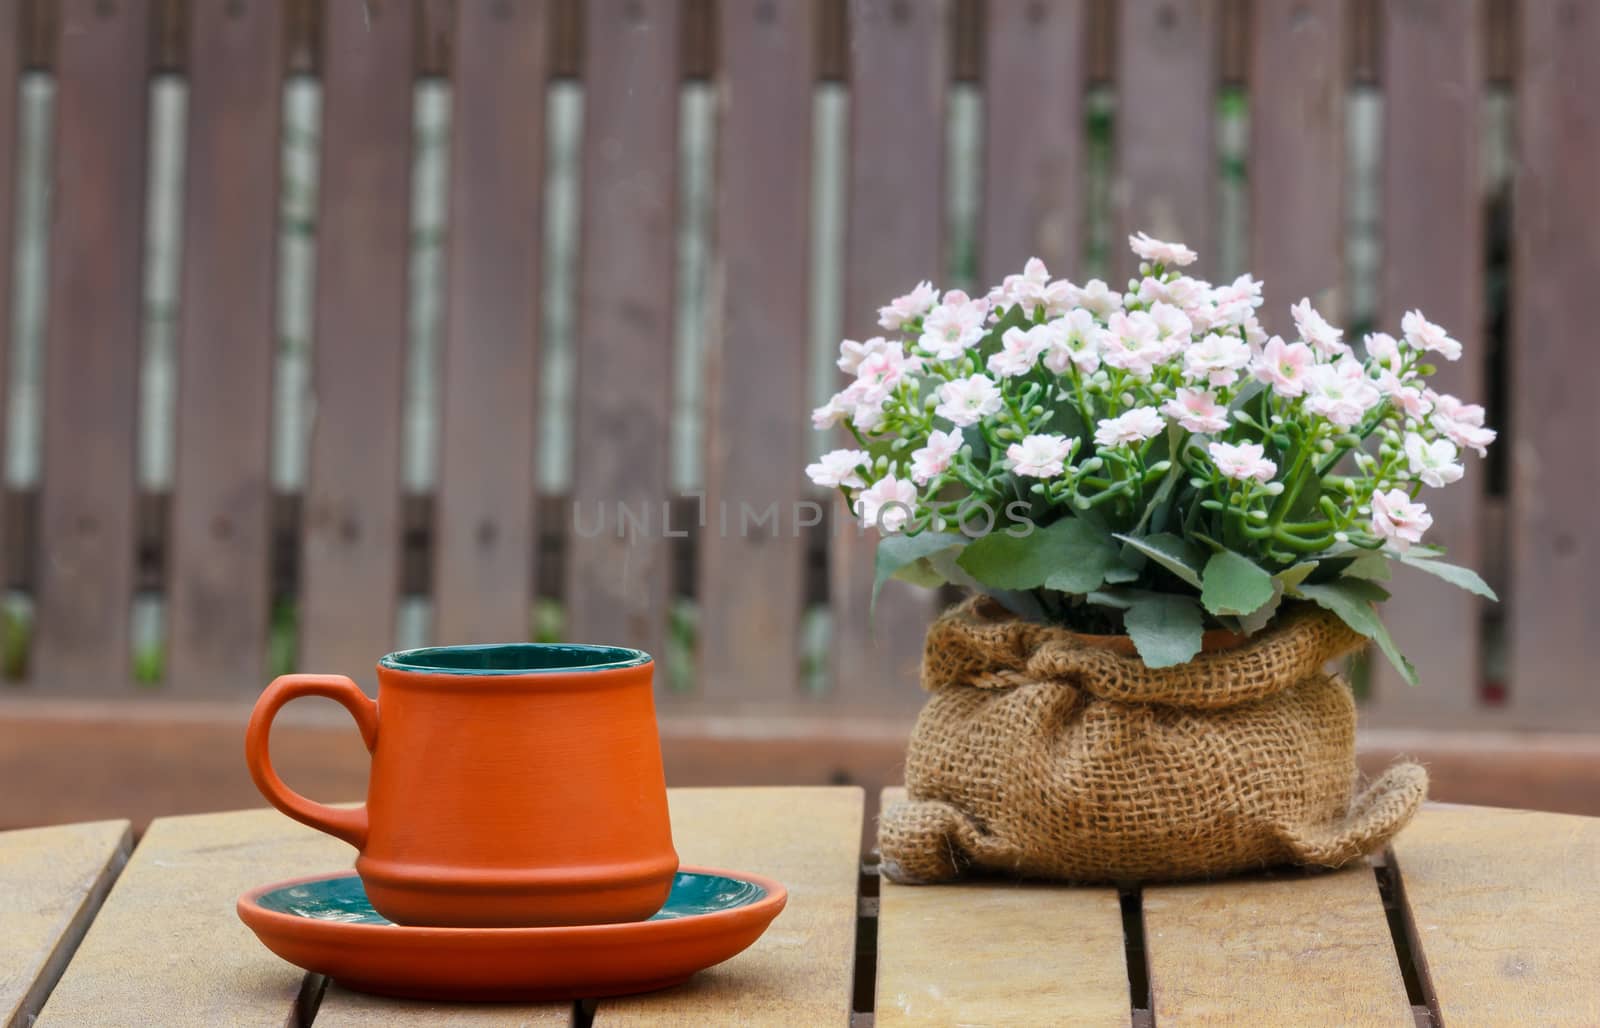 Cup of coffee and flowers on the wooden table with wooden seat in background.Focus on the cup.